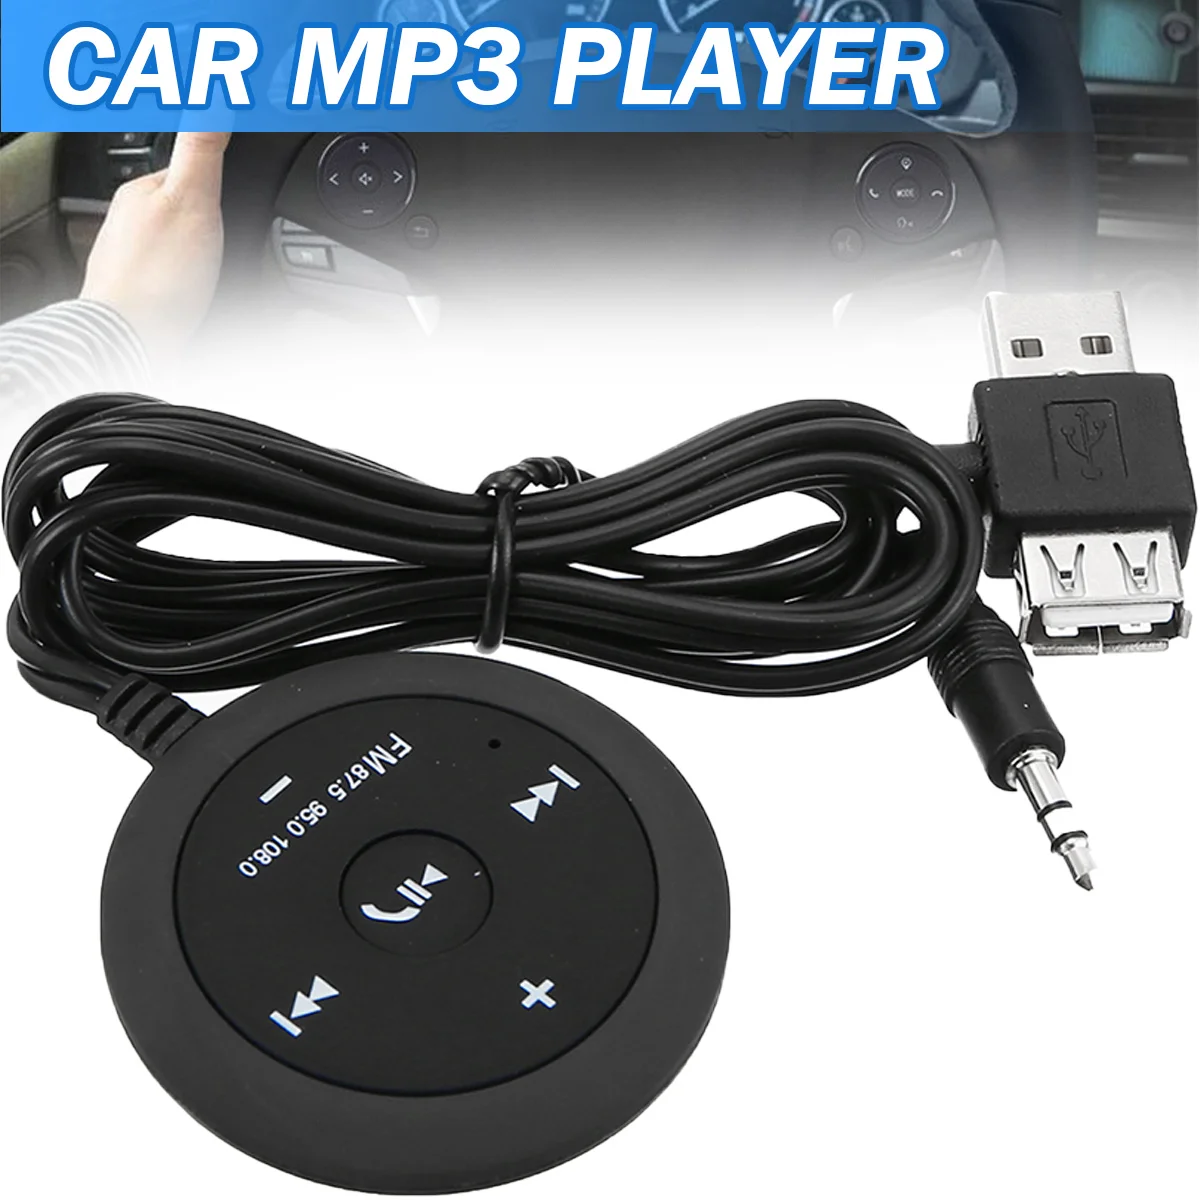 

New 1pc Portable Wireless Audio Transmitter Receiver Car Hands-free FM Transmitters Adapter MP3 Player